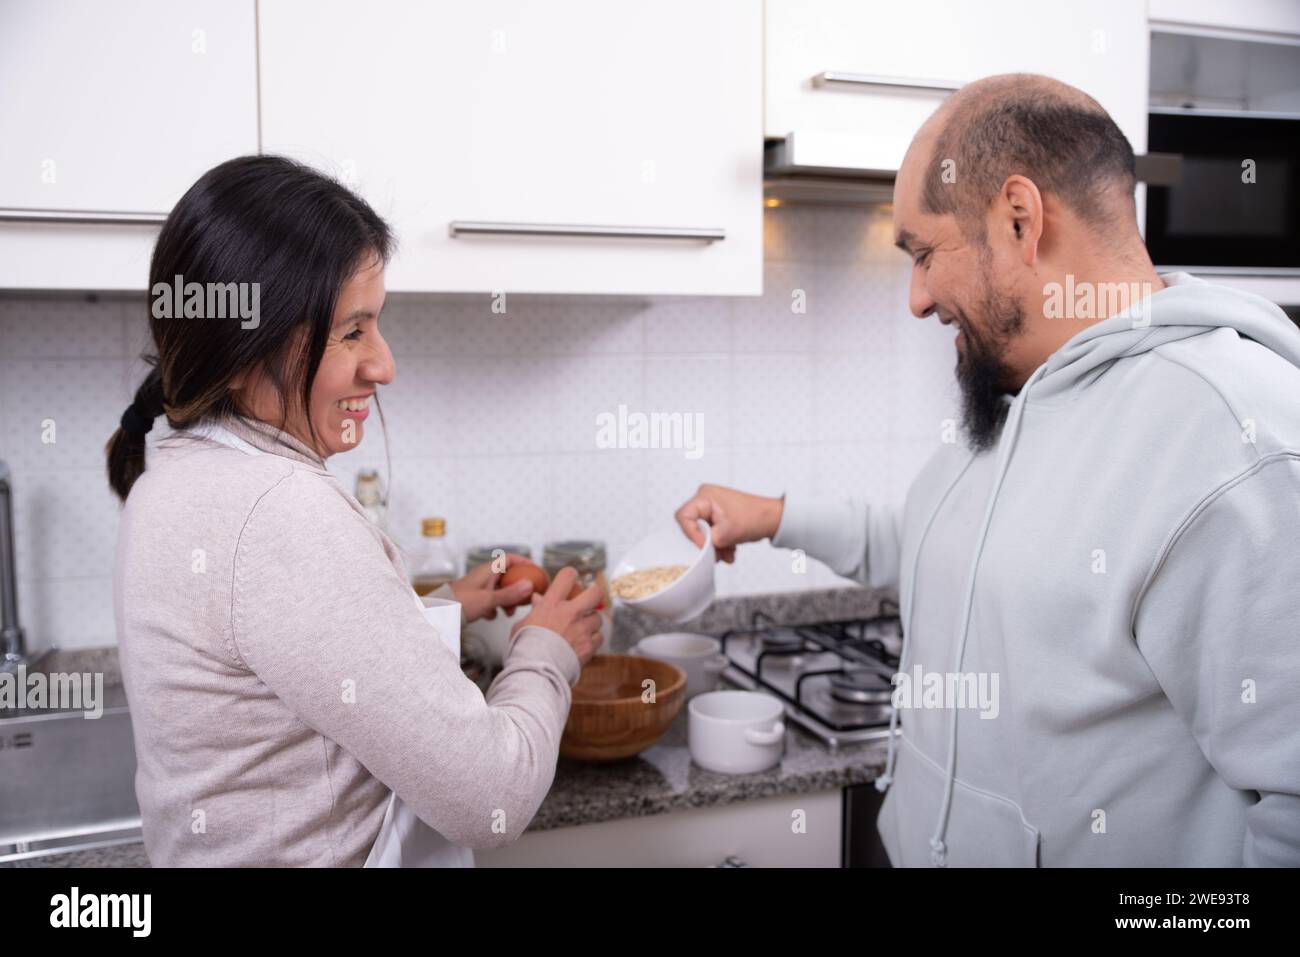 Couple talks and has fun while preparing cookies at home. Stock Photo